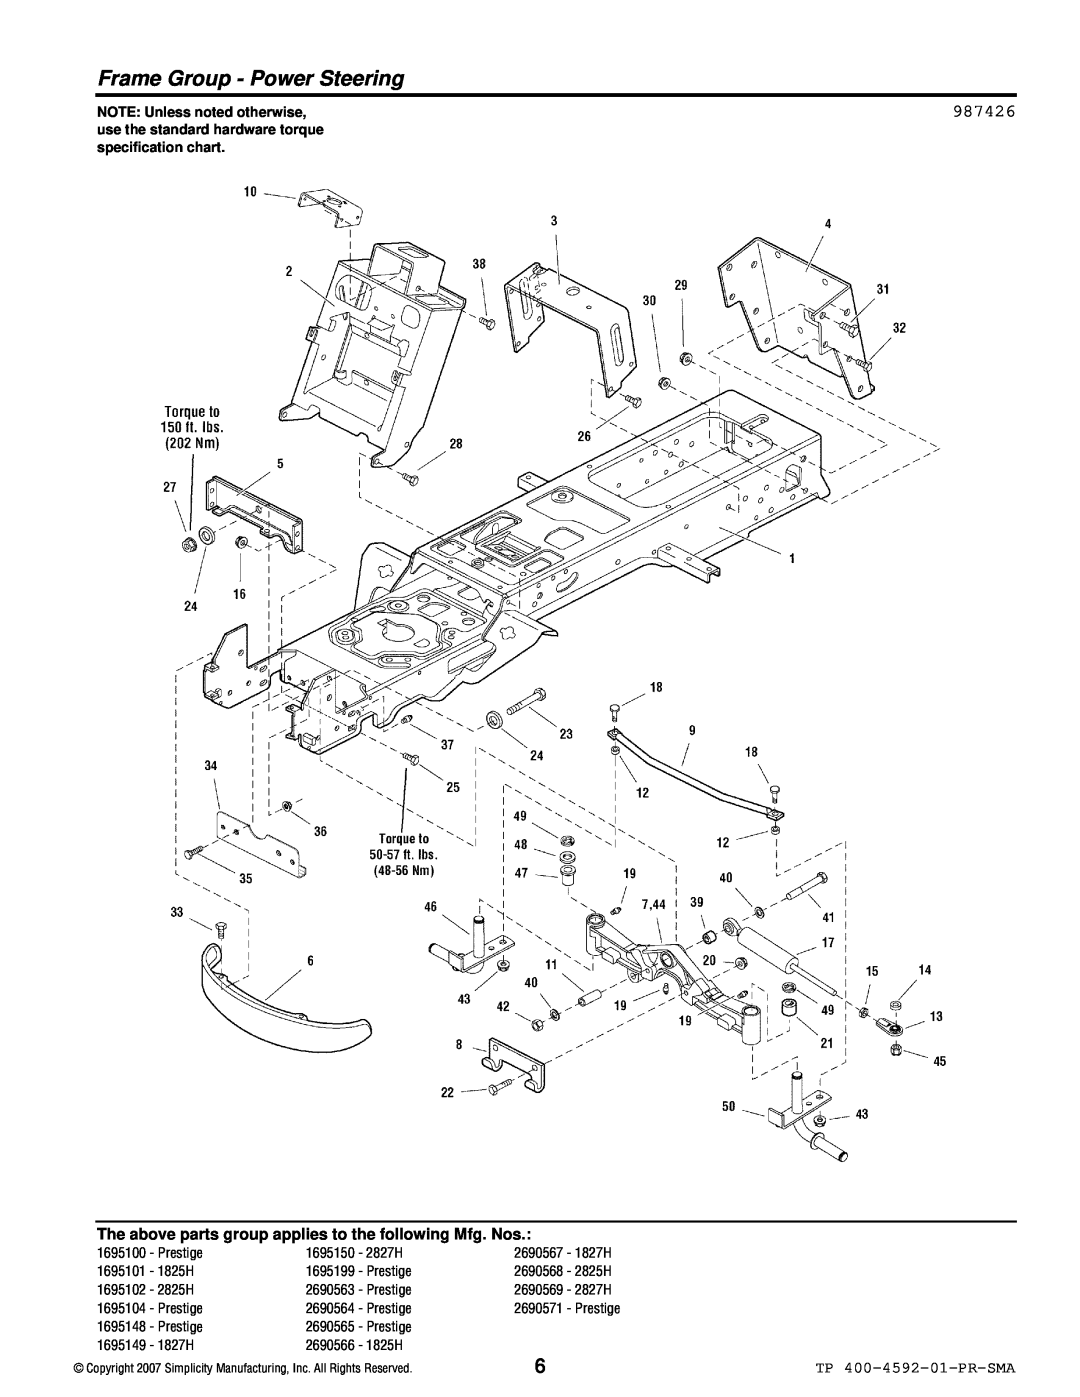 Simplicity 1800 Series manual Frame Group - Power Steering, 987426, TP 400-4592-01-PR-SMA, NOTE: Unless noted otherwise 